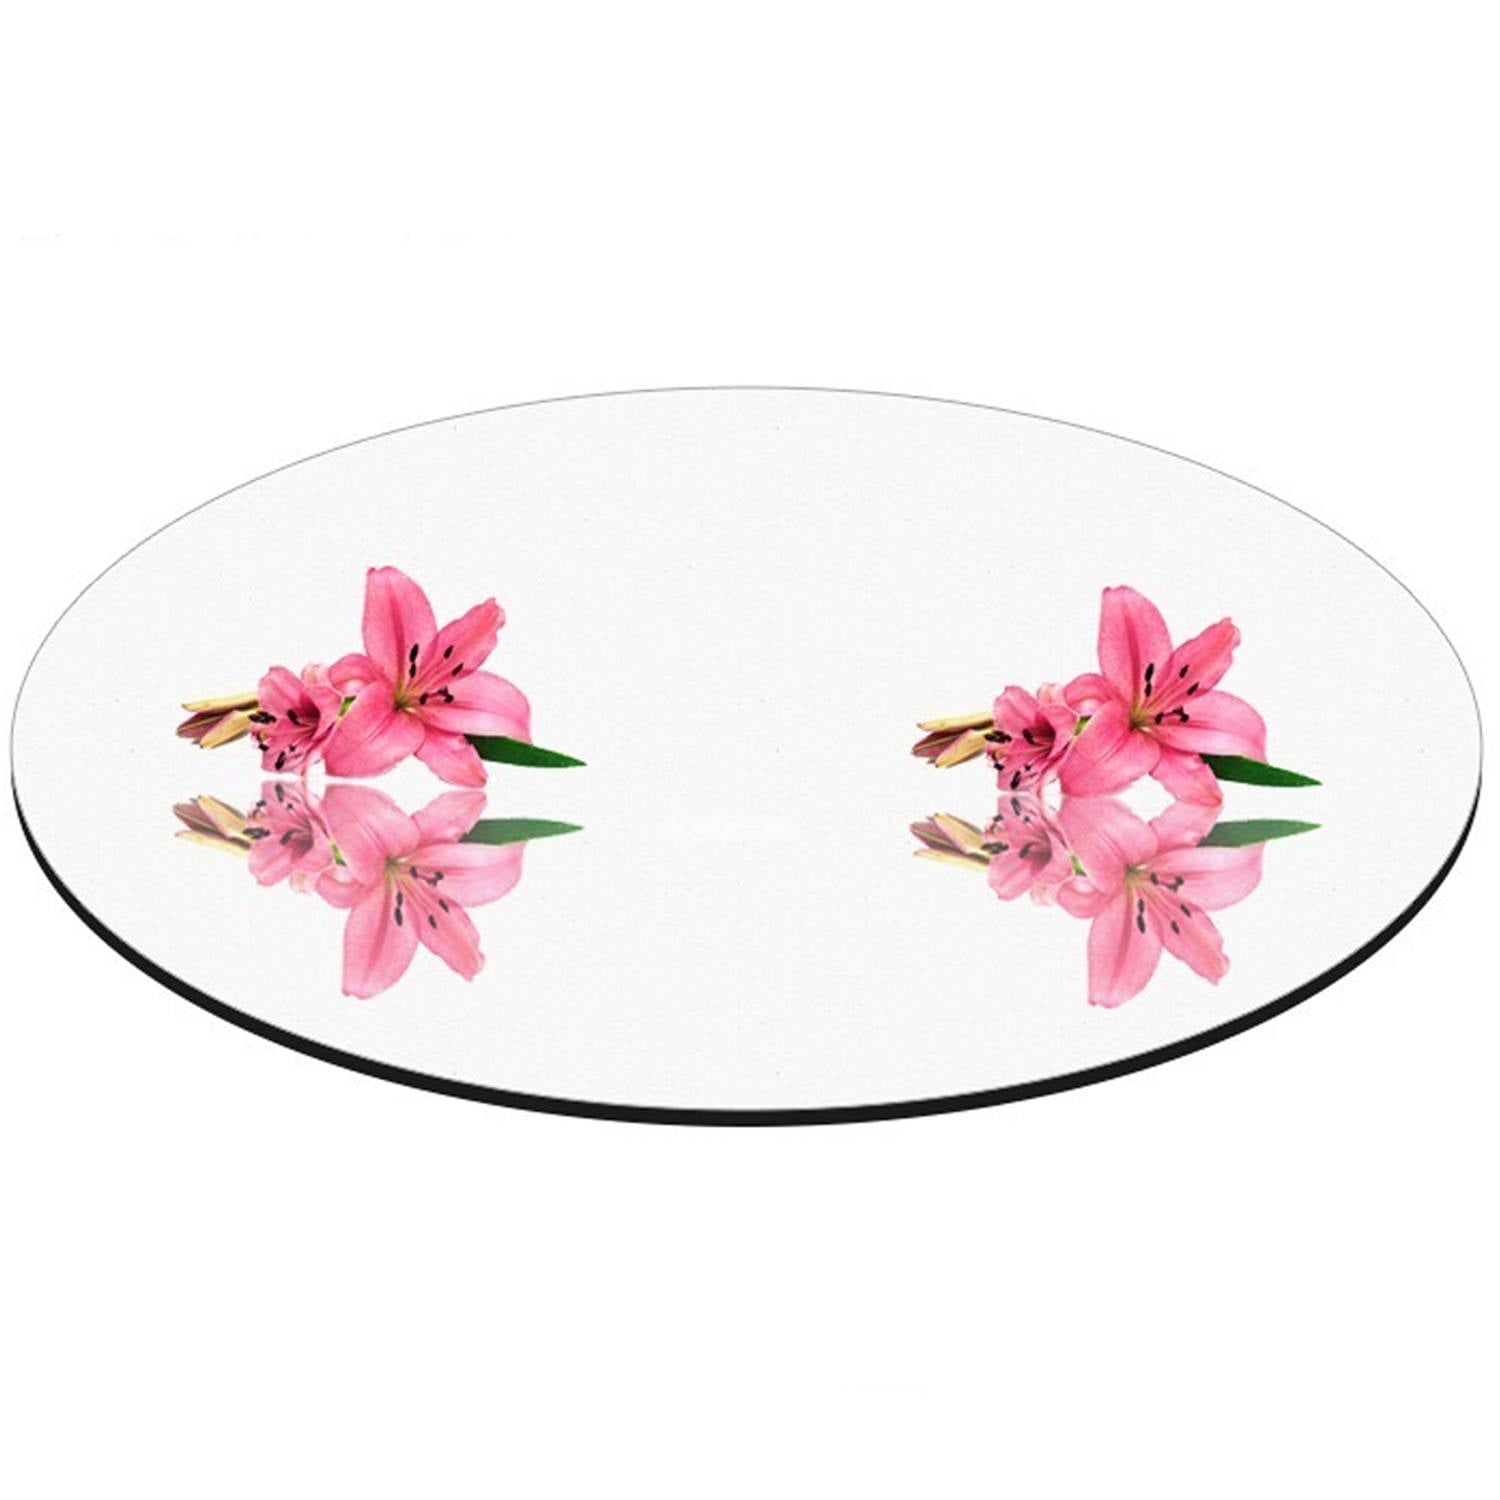 Coo-Drill 10 Round Mirrors for Centerpieces, Circle Mirror Centerpieces